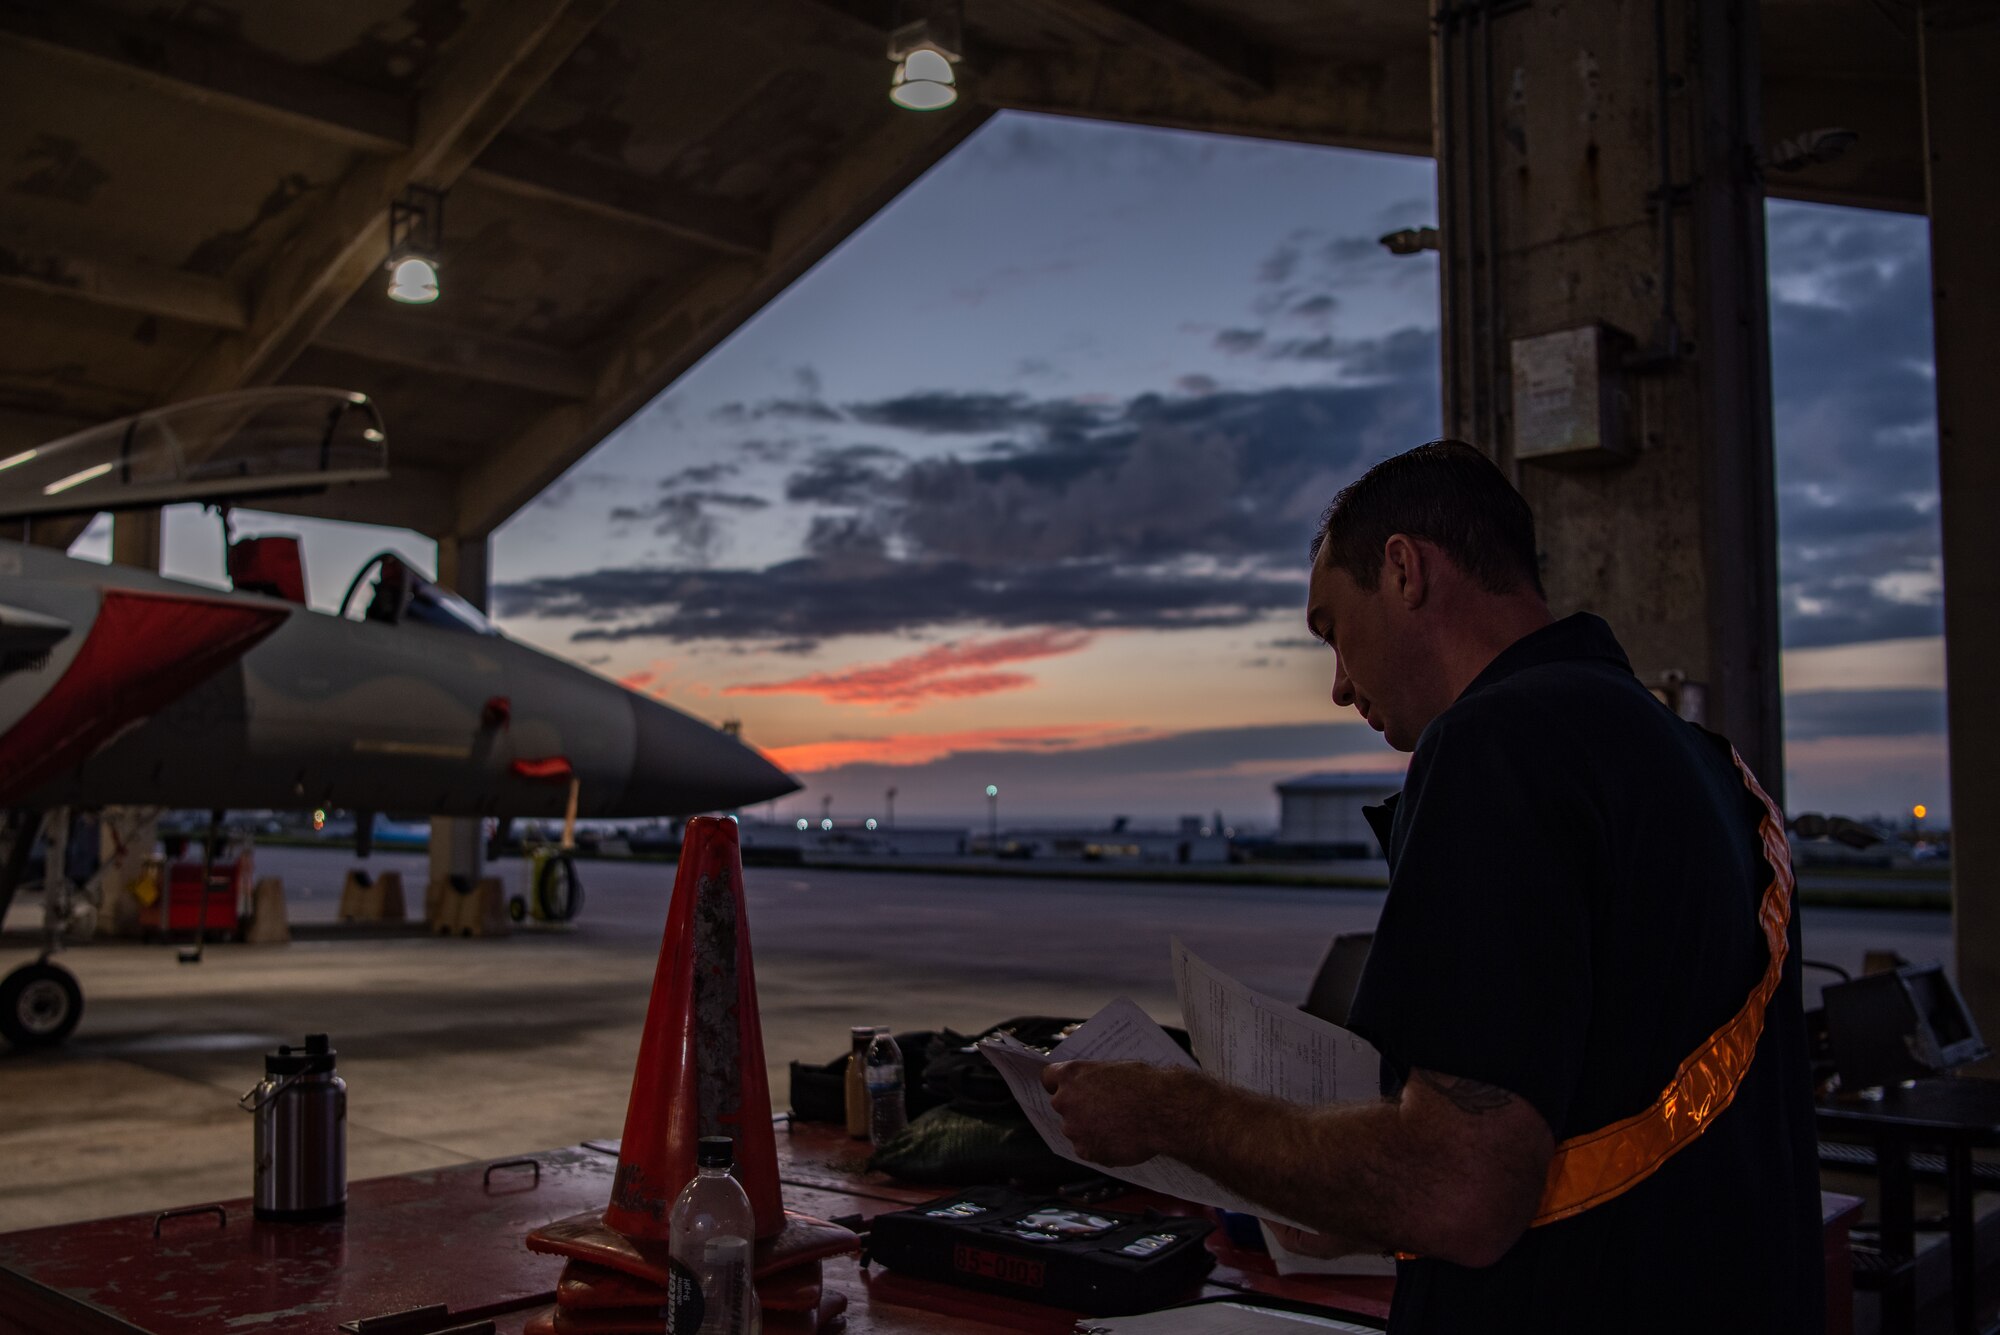 Airmen work on and around F-15C Eagles at sunset.